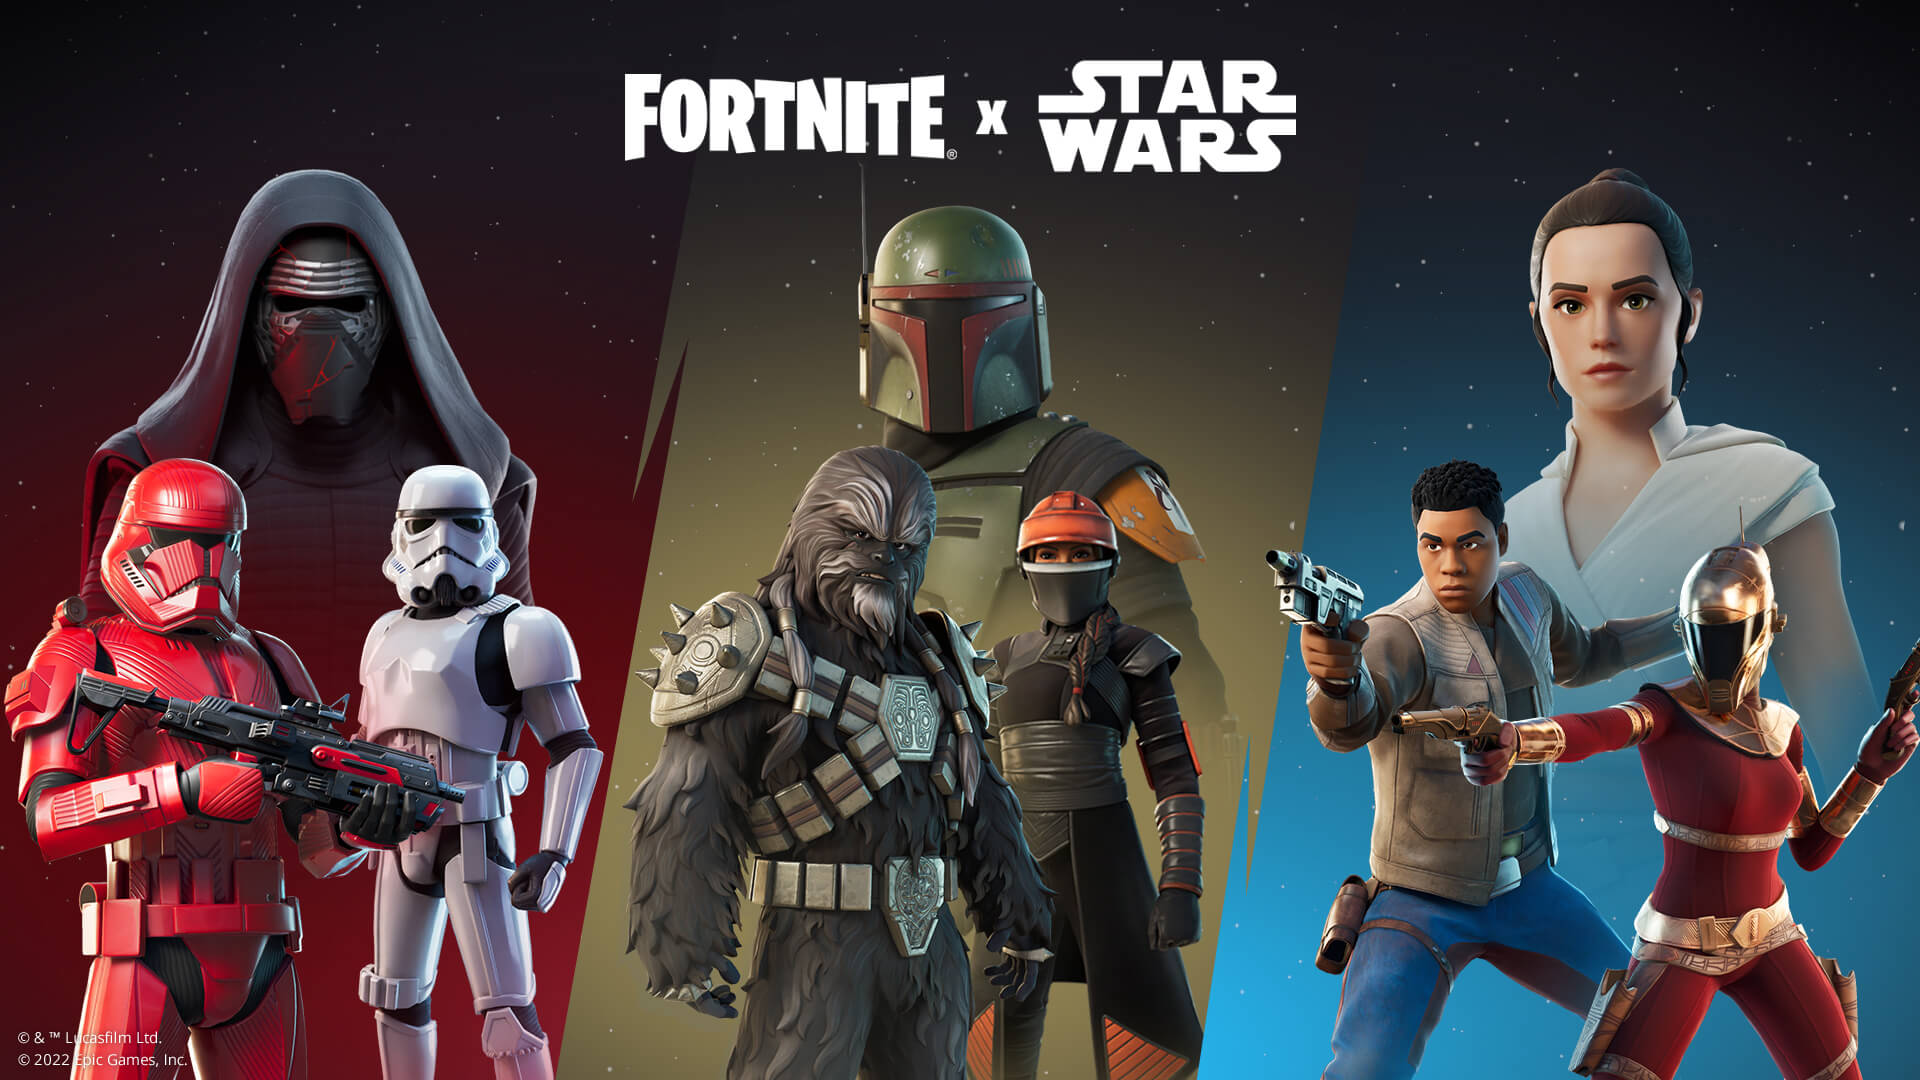 Leaked Item Shop - May 7, 2023